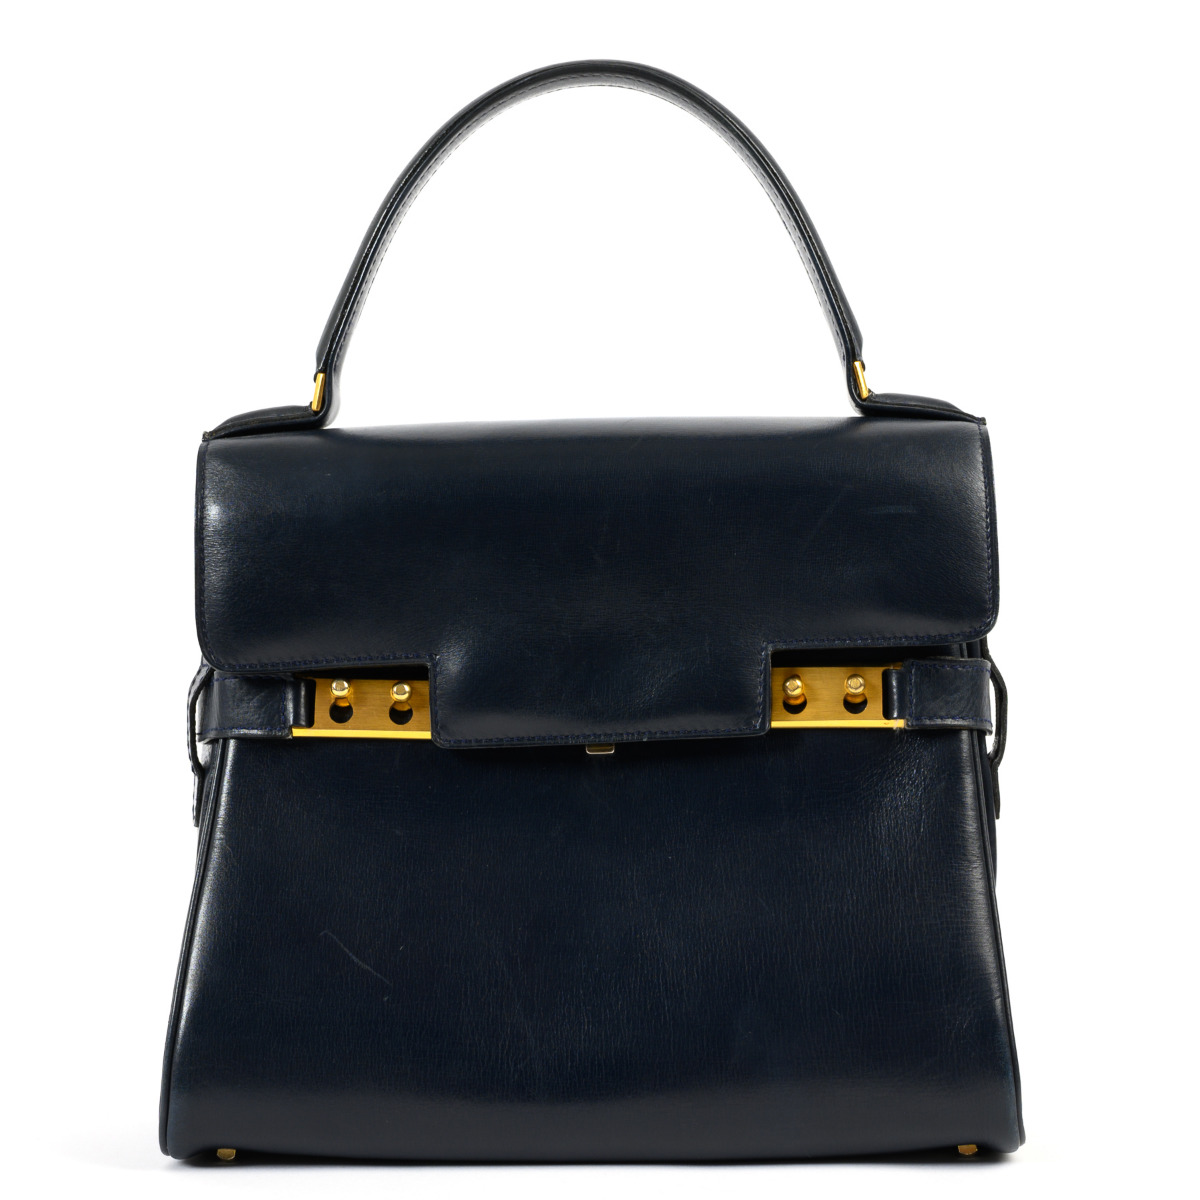 Before quiet luxury, there was Delvaux — Hashtag Legend